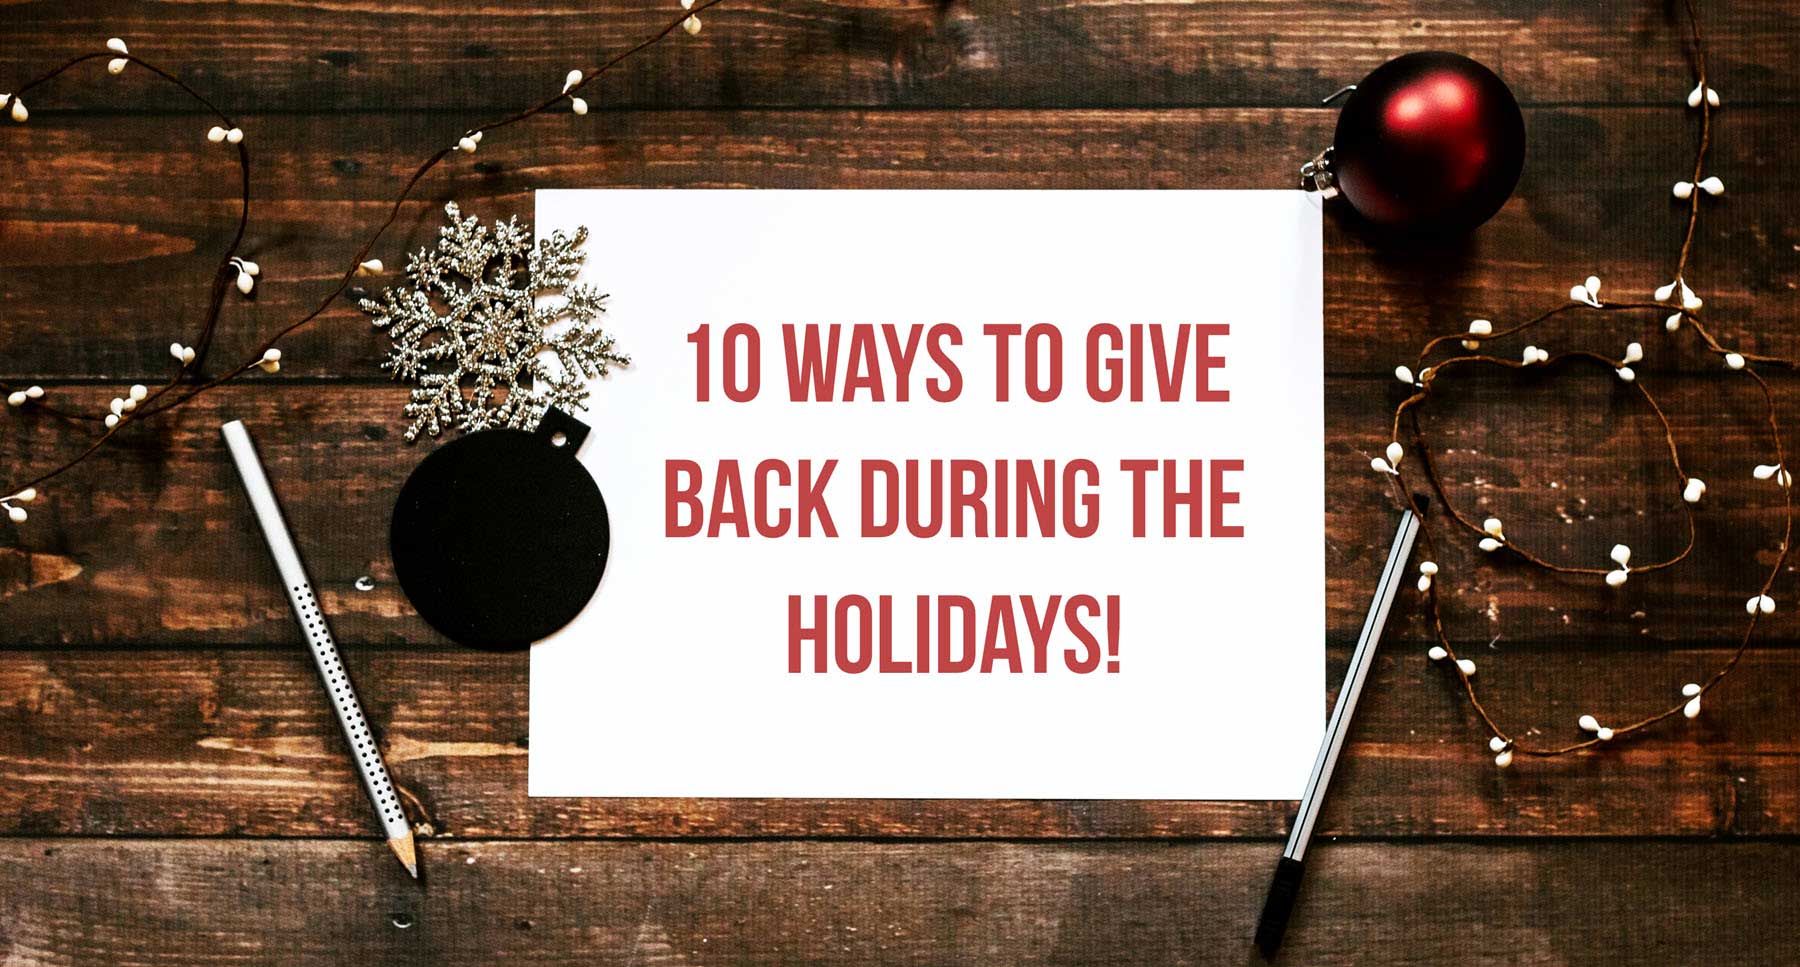 10-Ways-to-Give-Back-During-the-Holidays-Ideas-to-help-others-at-Christmas-self-care-checklists-thehopeline